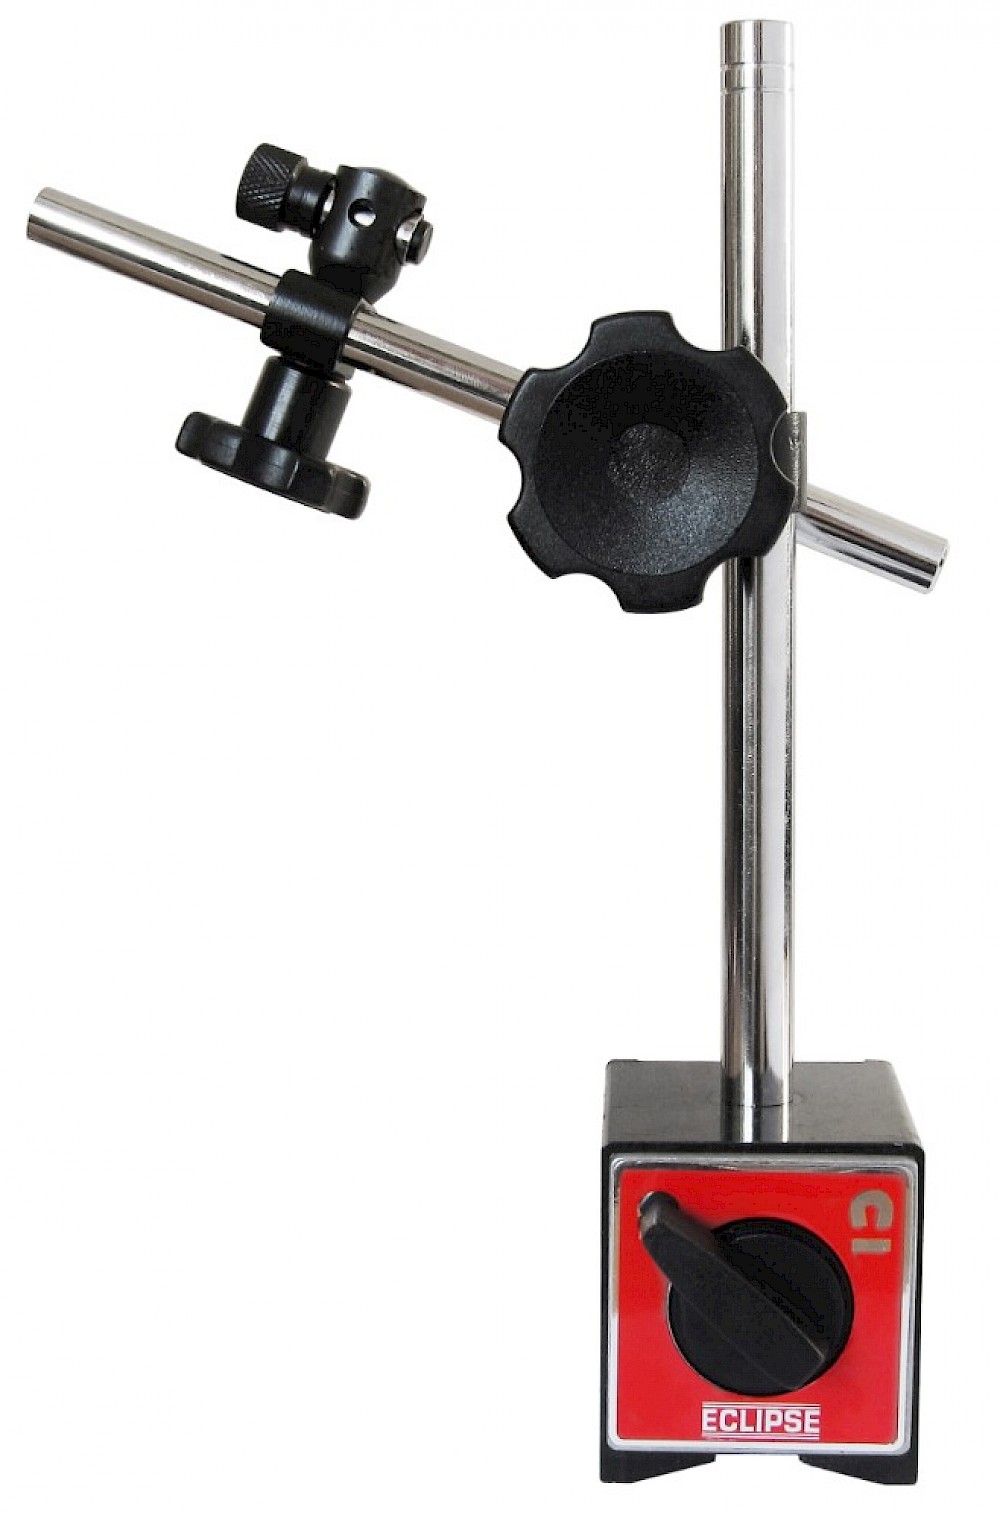 Details about    New Eclipse 1977A1 176lb Pull M8X1.25 Dial Indicator Lever Switch Magnetic Base 